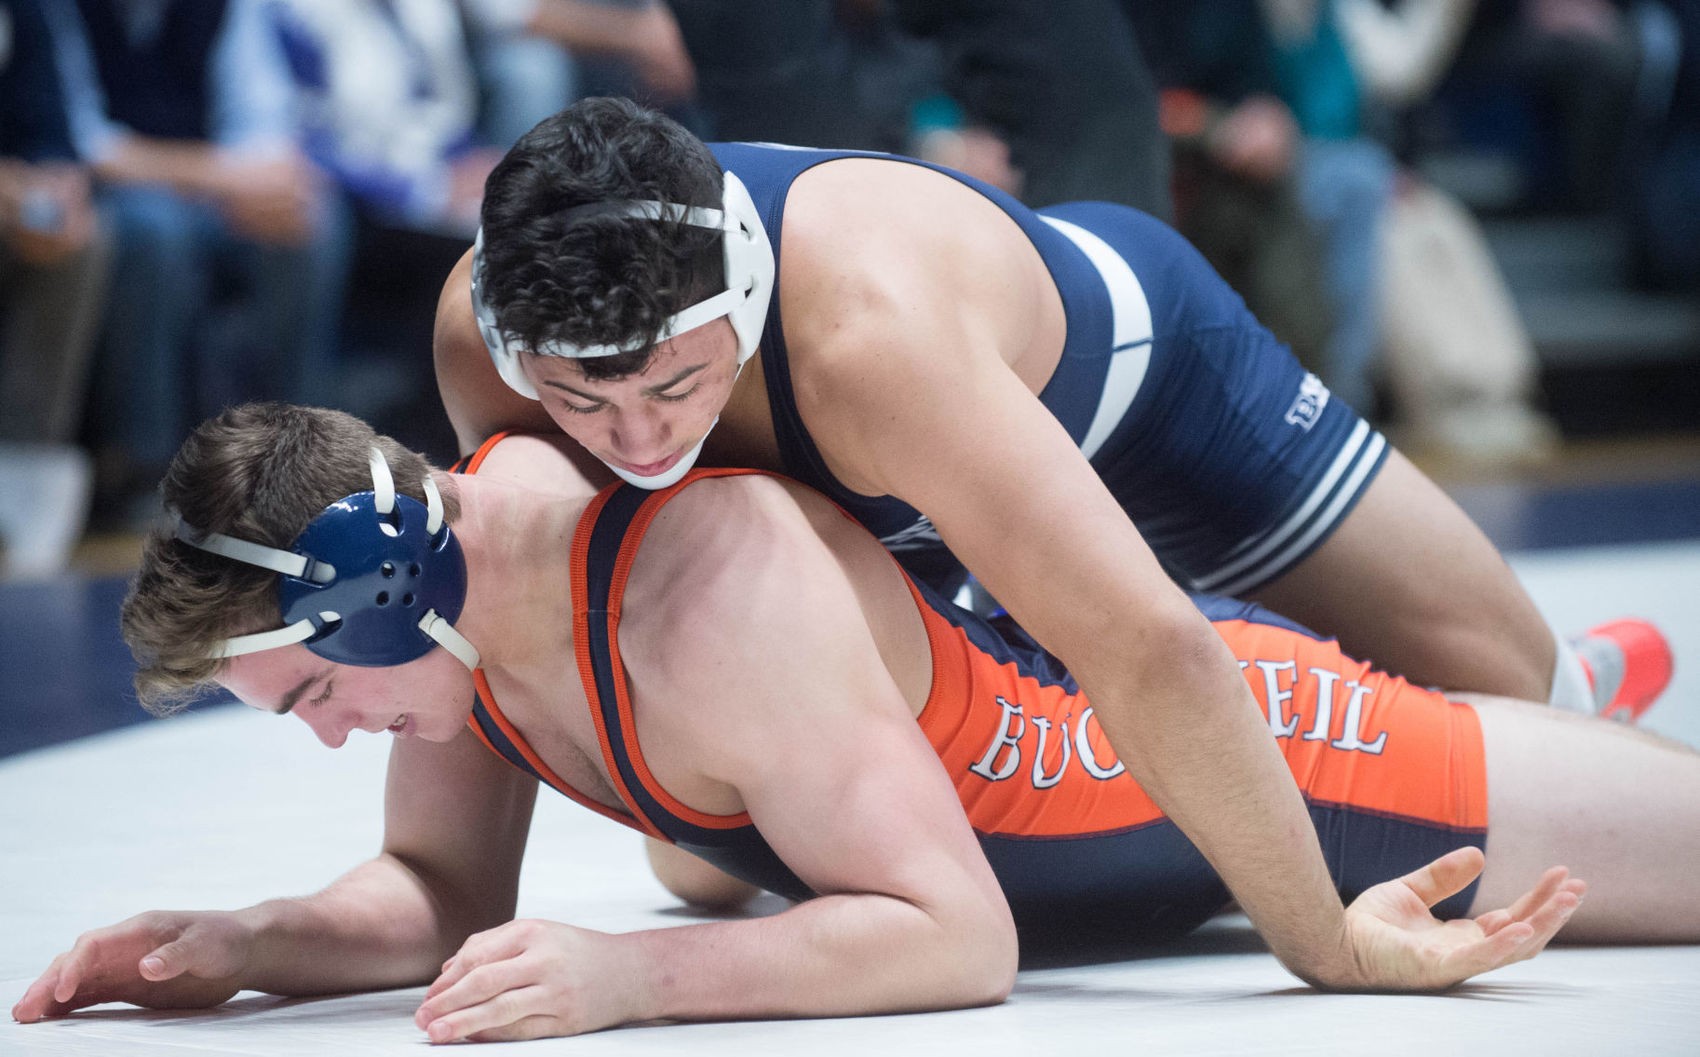 Penn State wrestling advances five to the finals after Session 4 of the